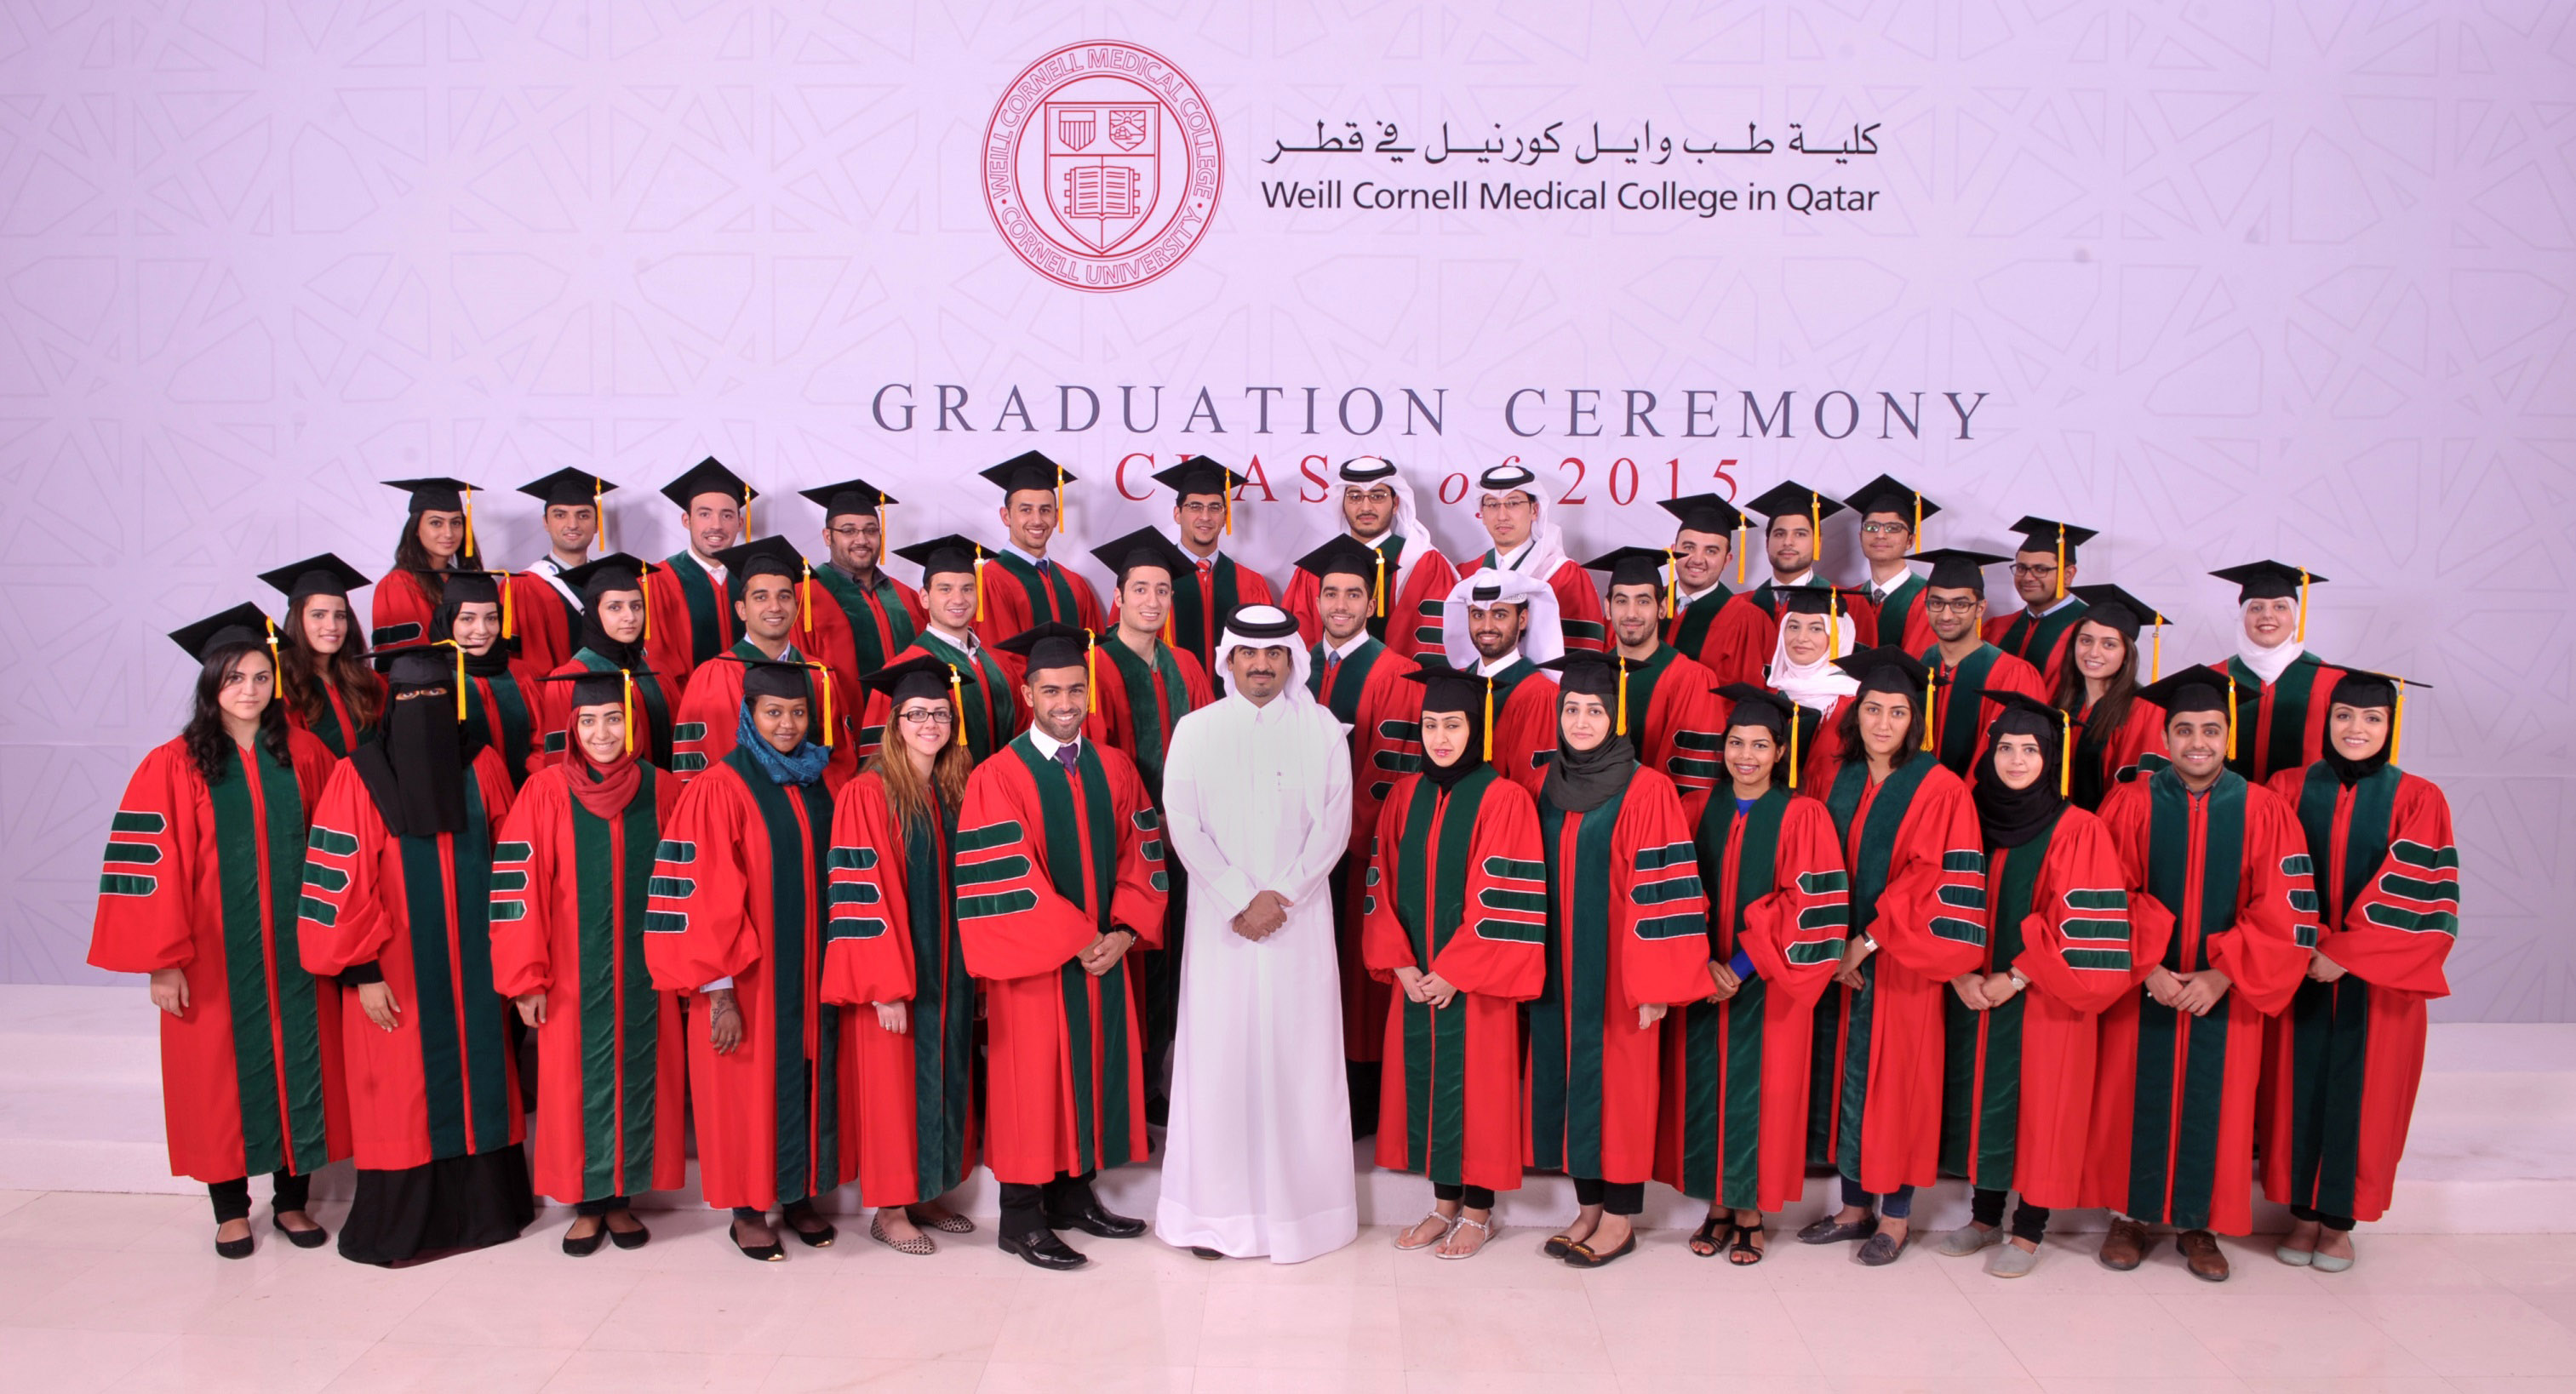 Weill Cornell Medical College in Qatar's graduation class of 2015 is presented to an audience of family, friends and faculty. All Photos: Weill Cornell Medical College in Qatar